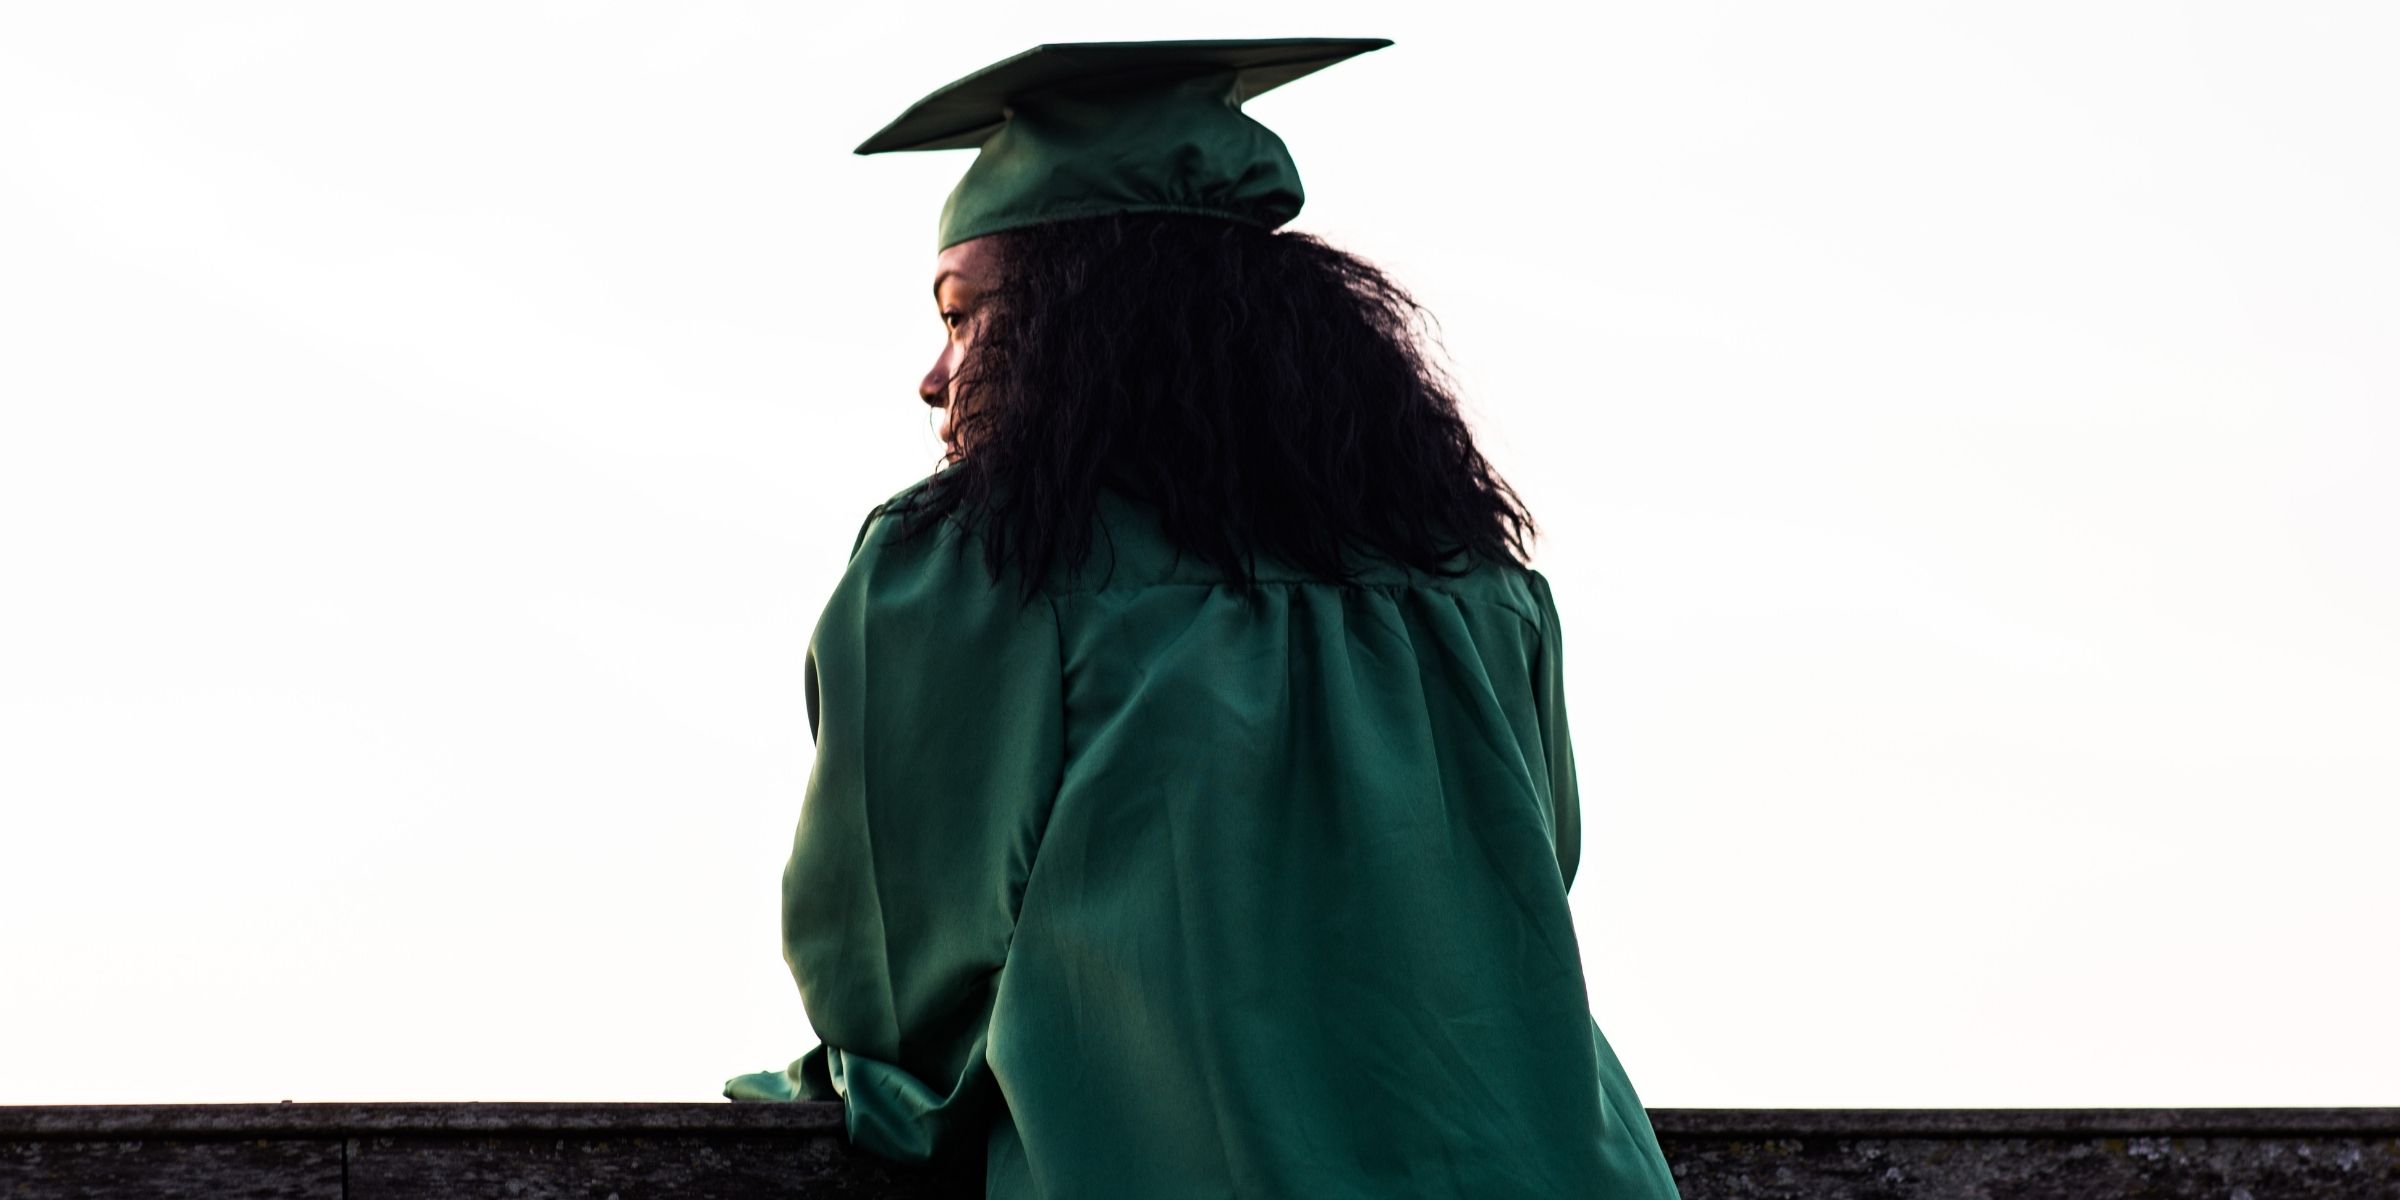 a student wearing a graduation cap and gown looking away from the camera